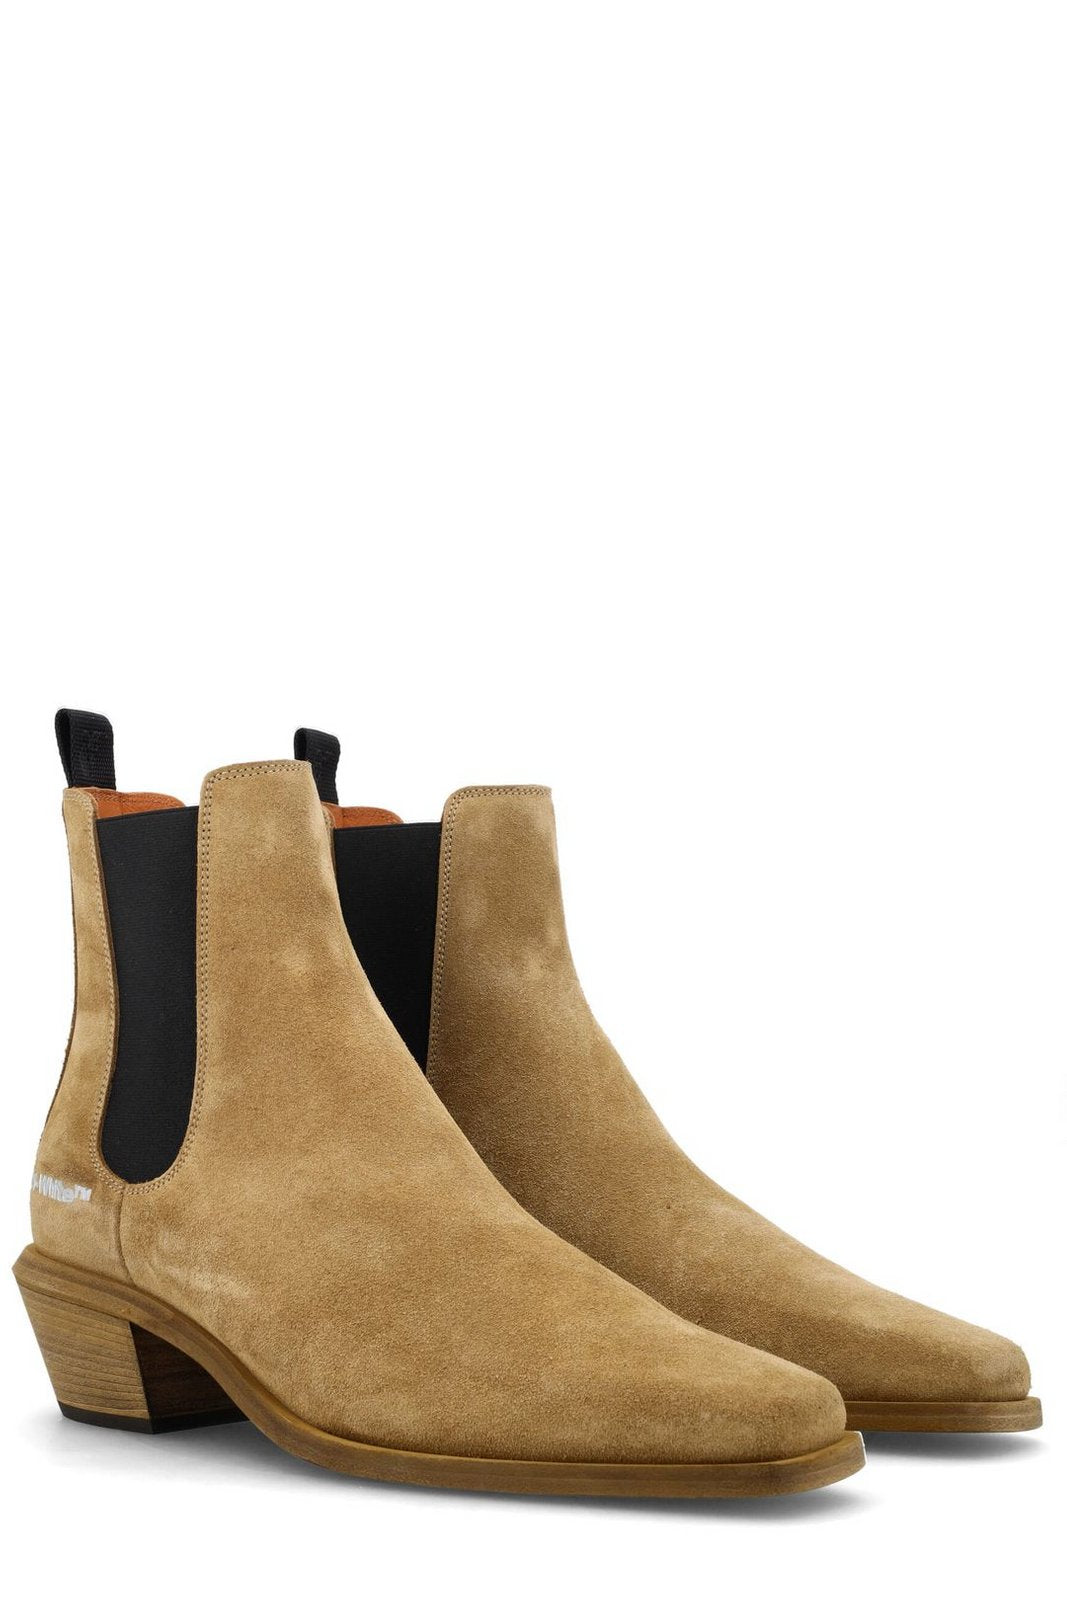 Off-White Texan Pointed Toe Ankle Boots